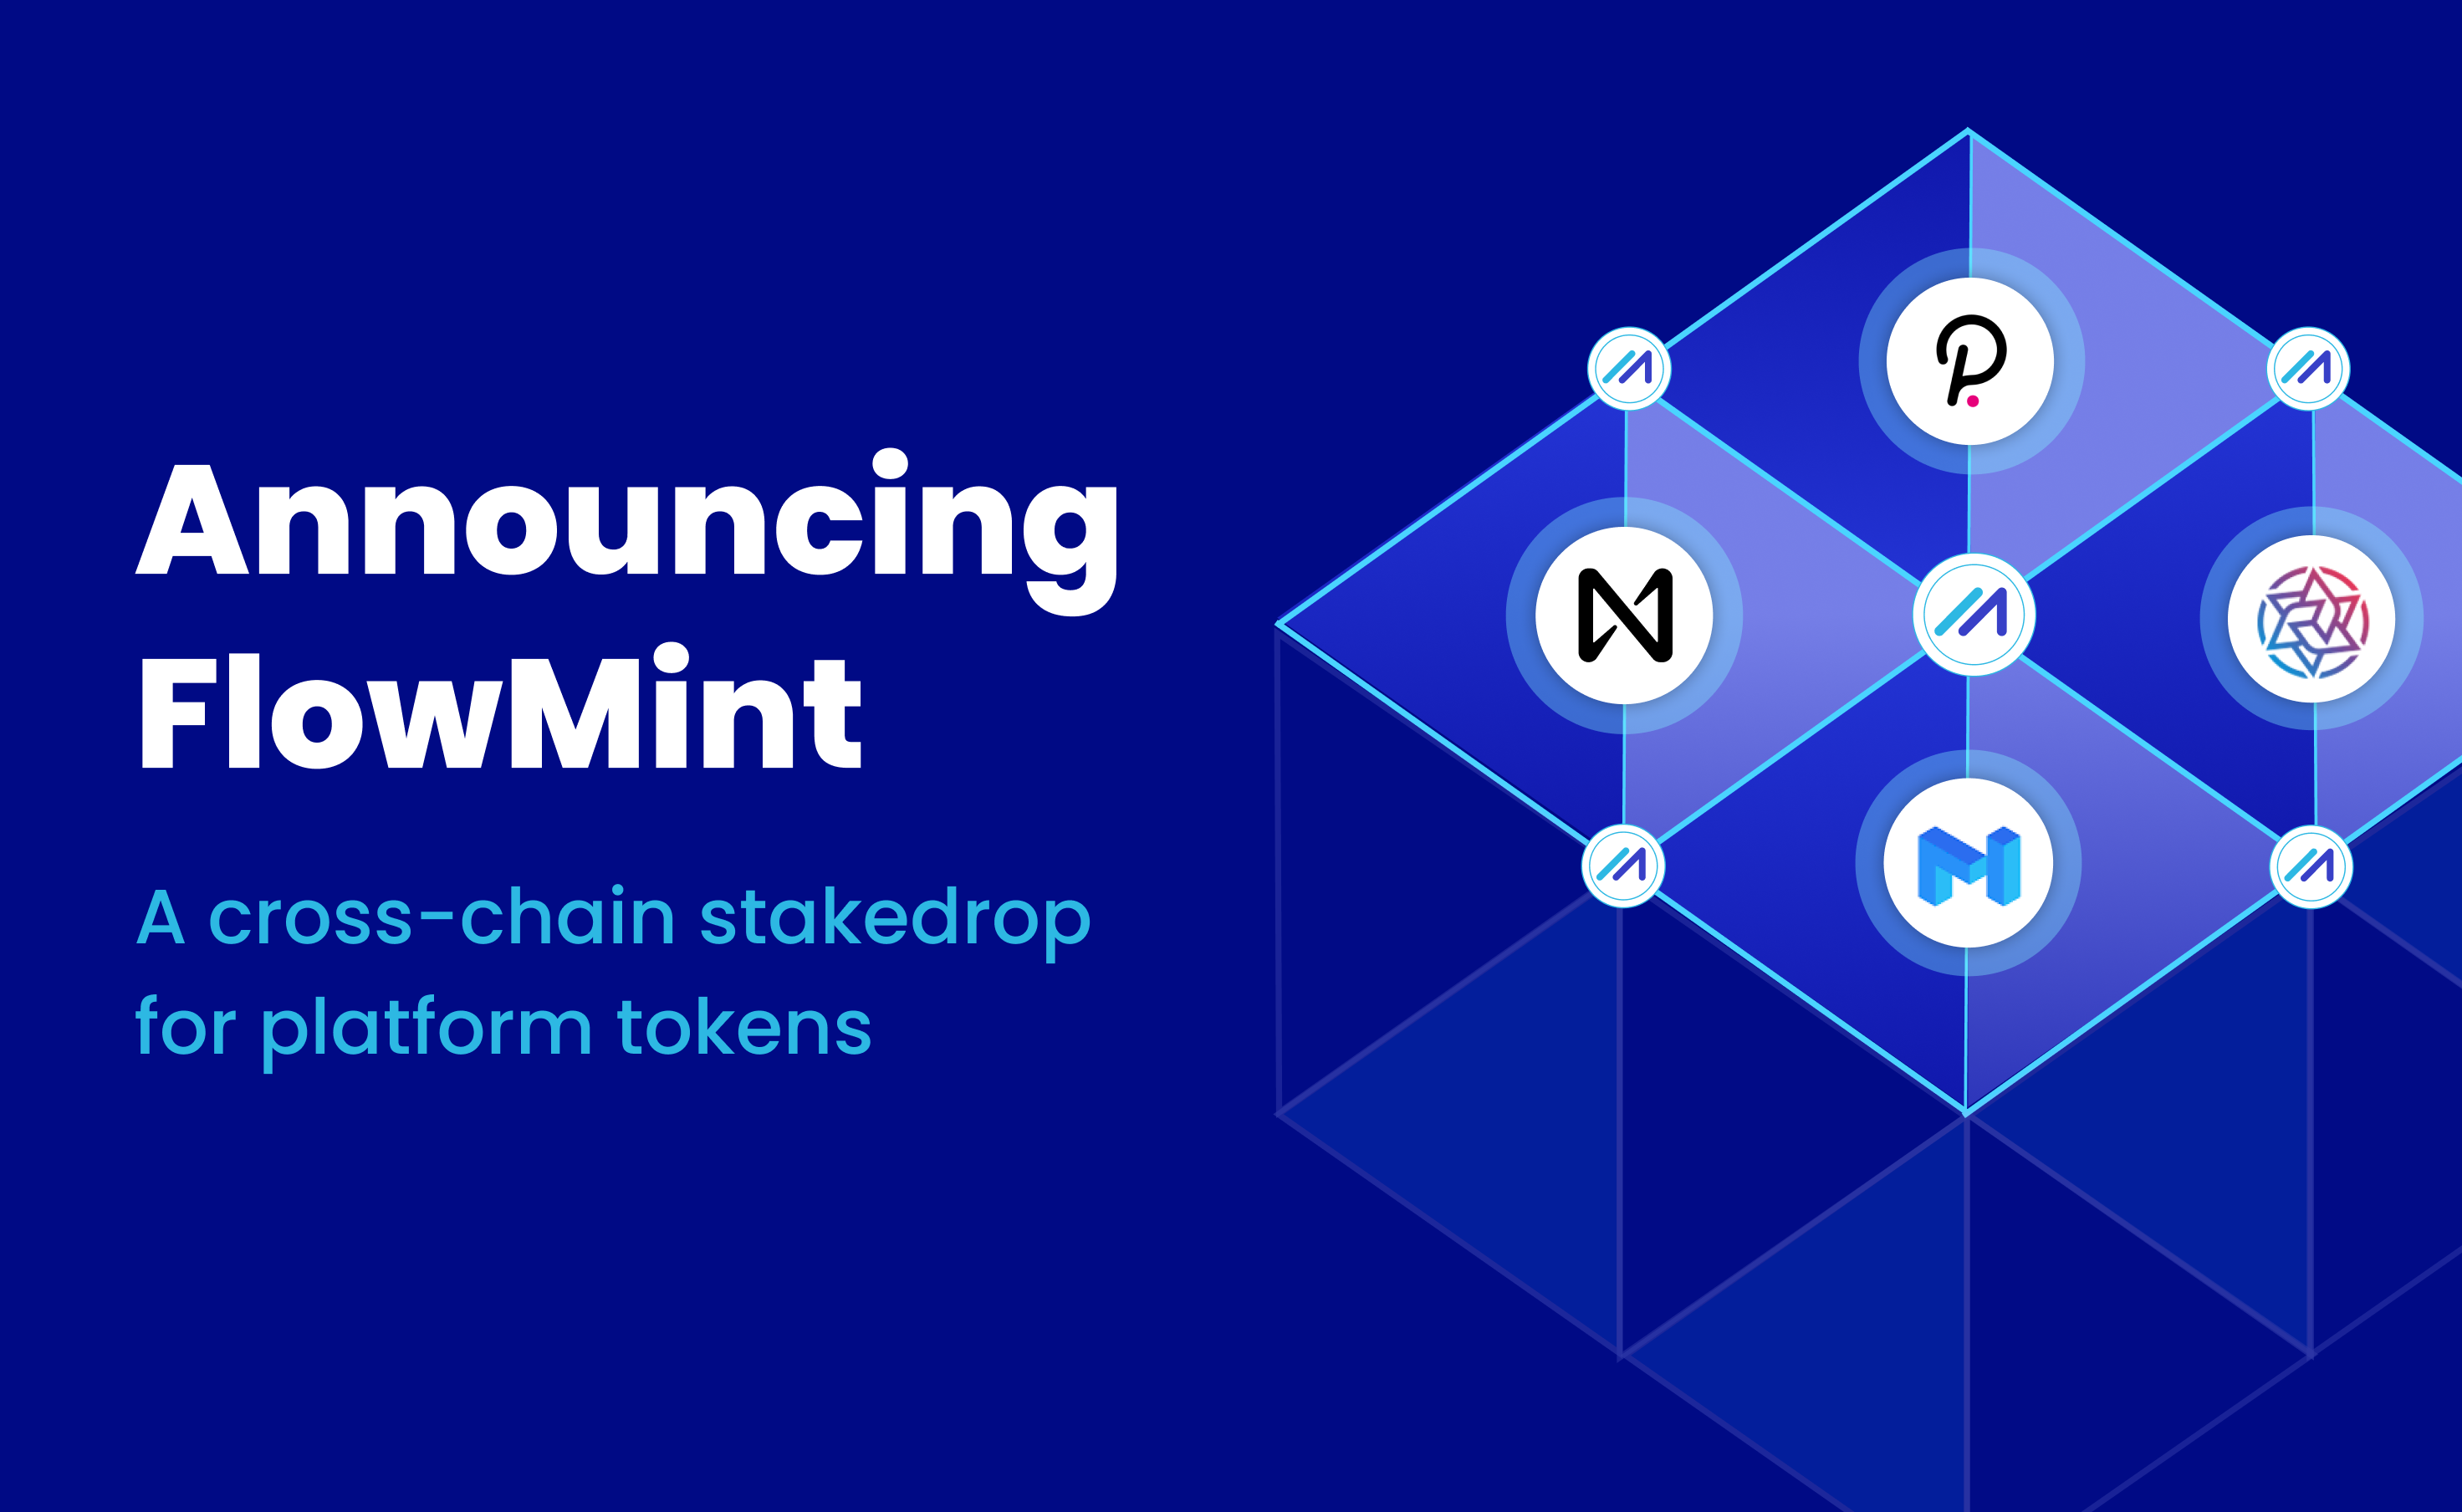 Announcing FlowMint: A cross-chain stakedrop for platform tokens